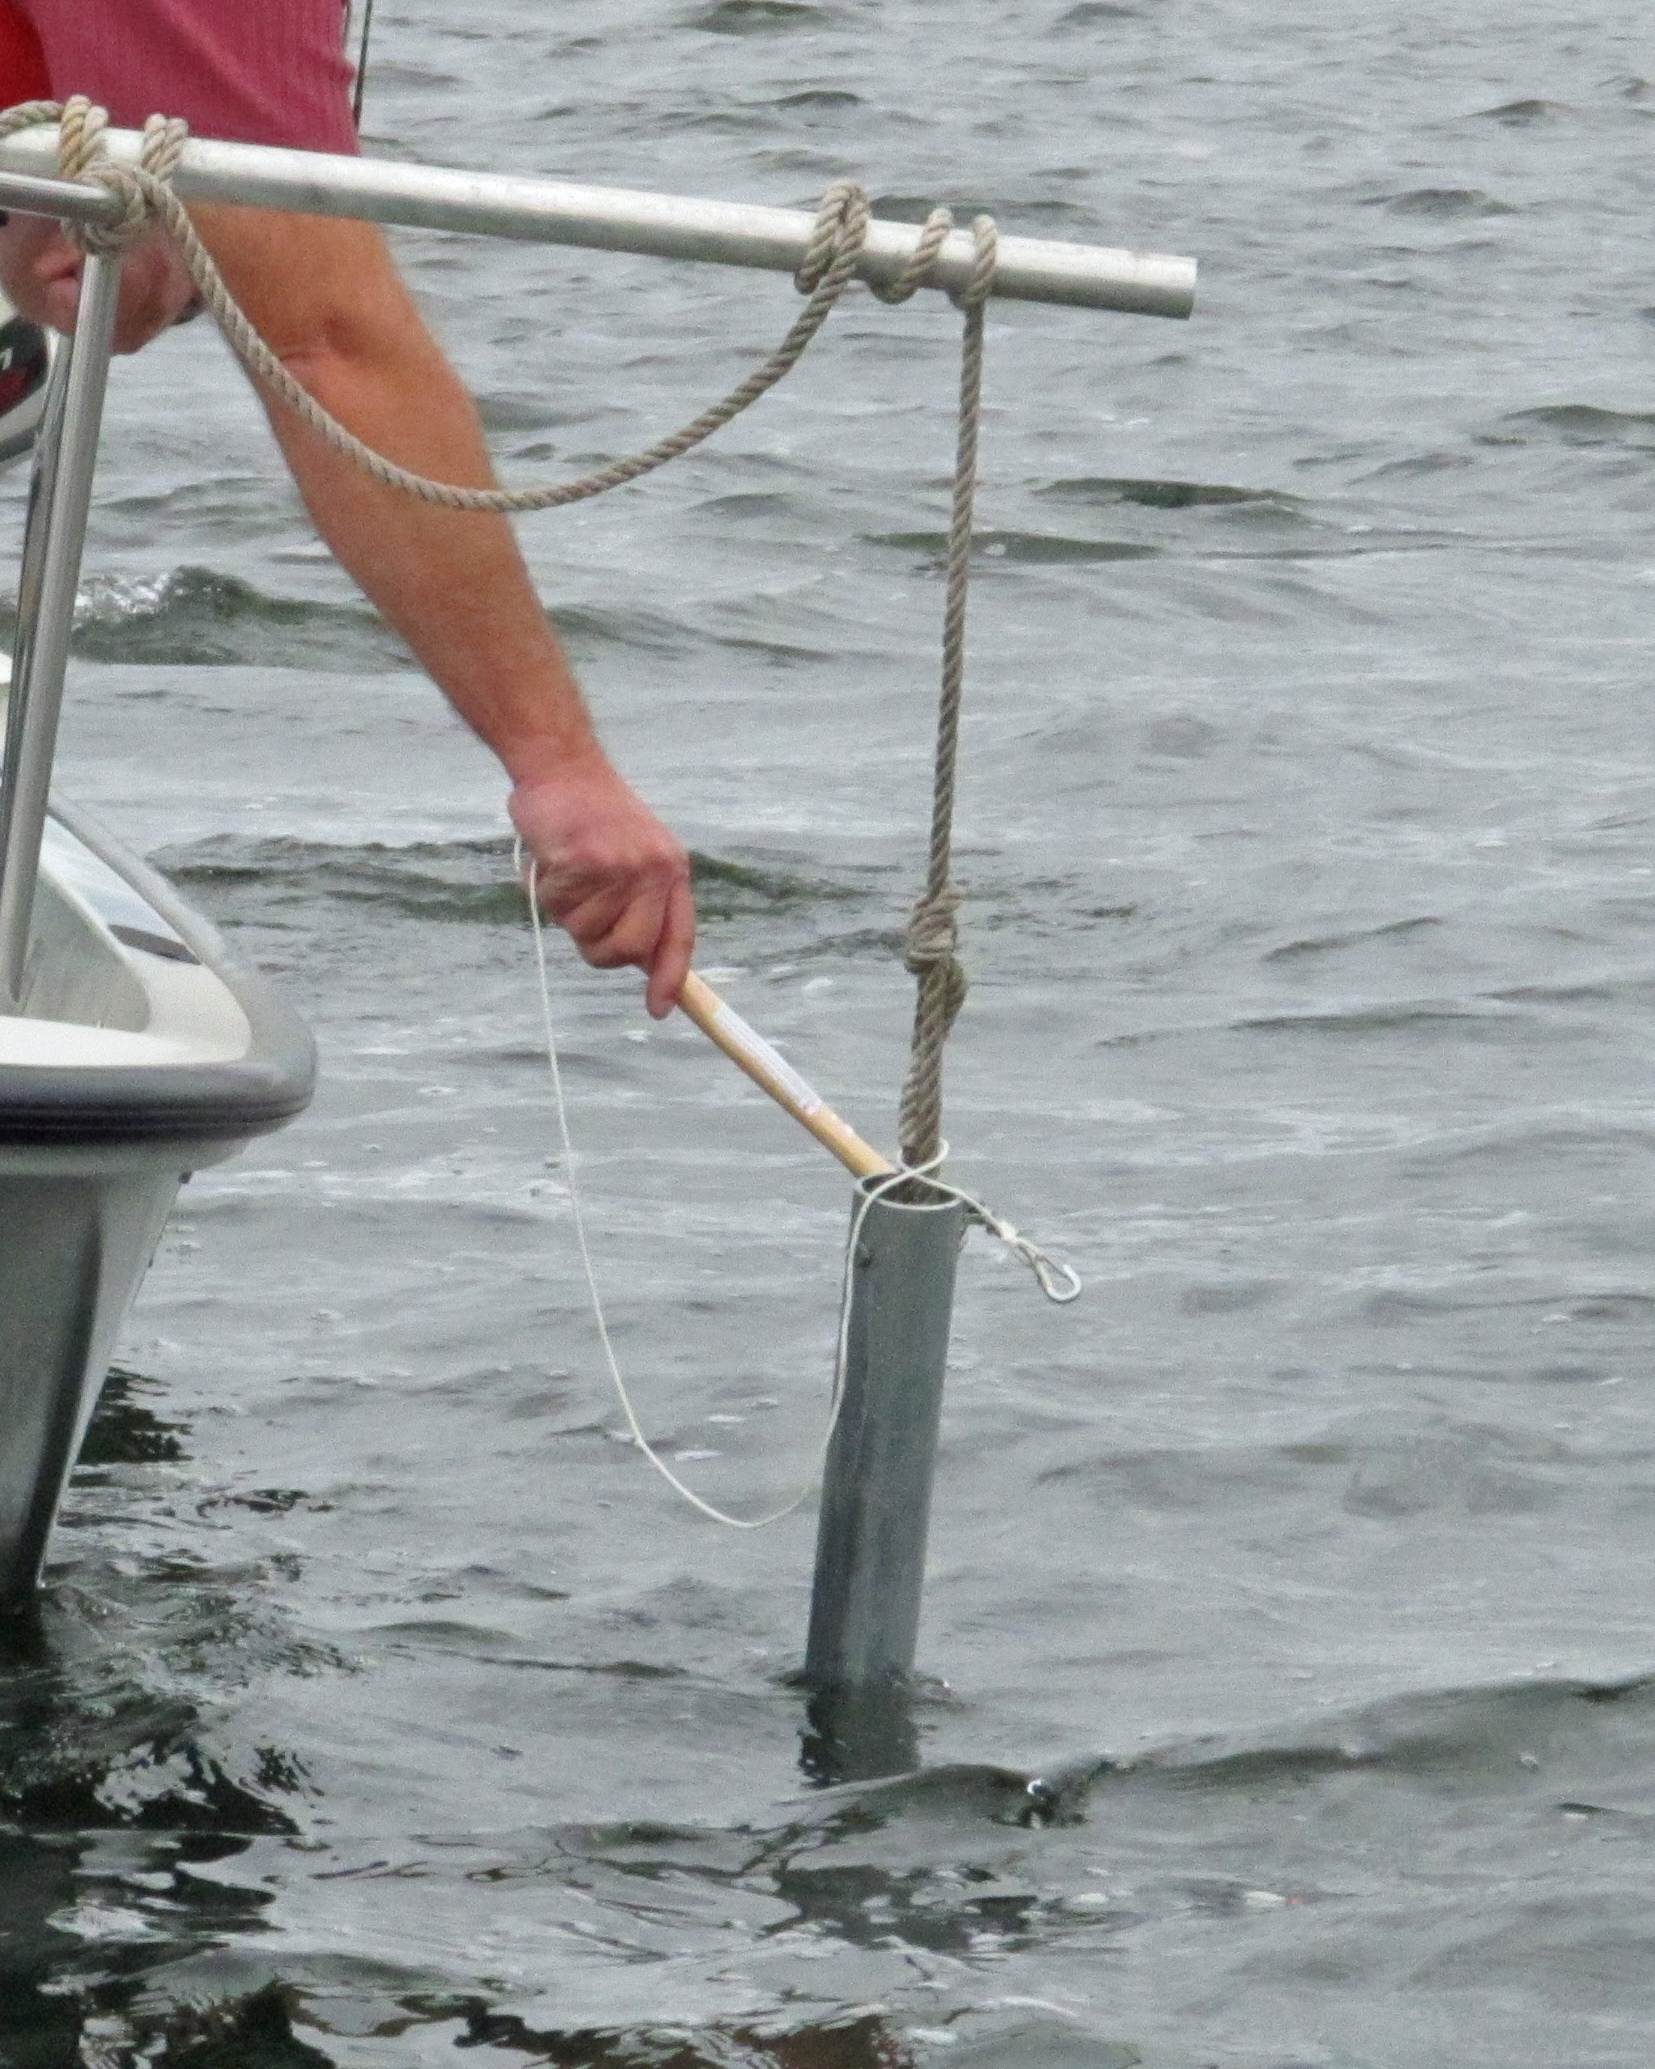 A pipe suspended by cord from a stick is held partly in the water off the side of a small boat, a person's hand holds a metal bar to strike the pipe.